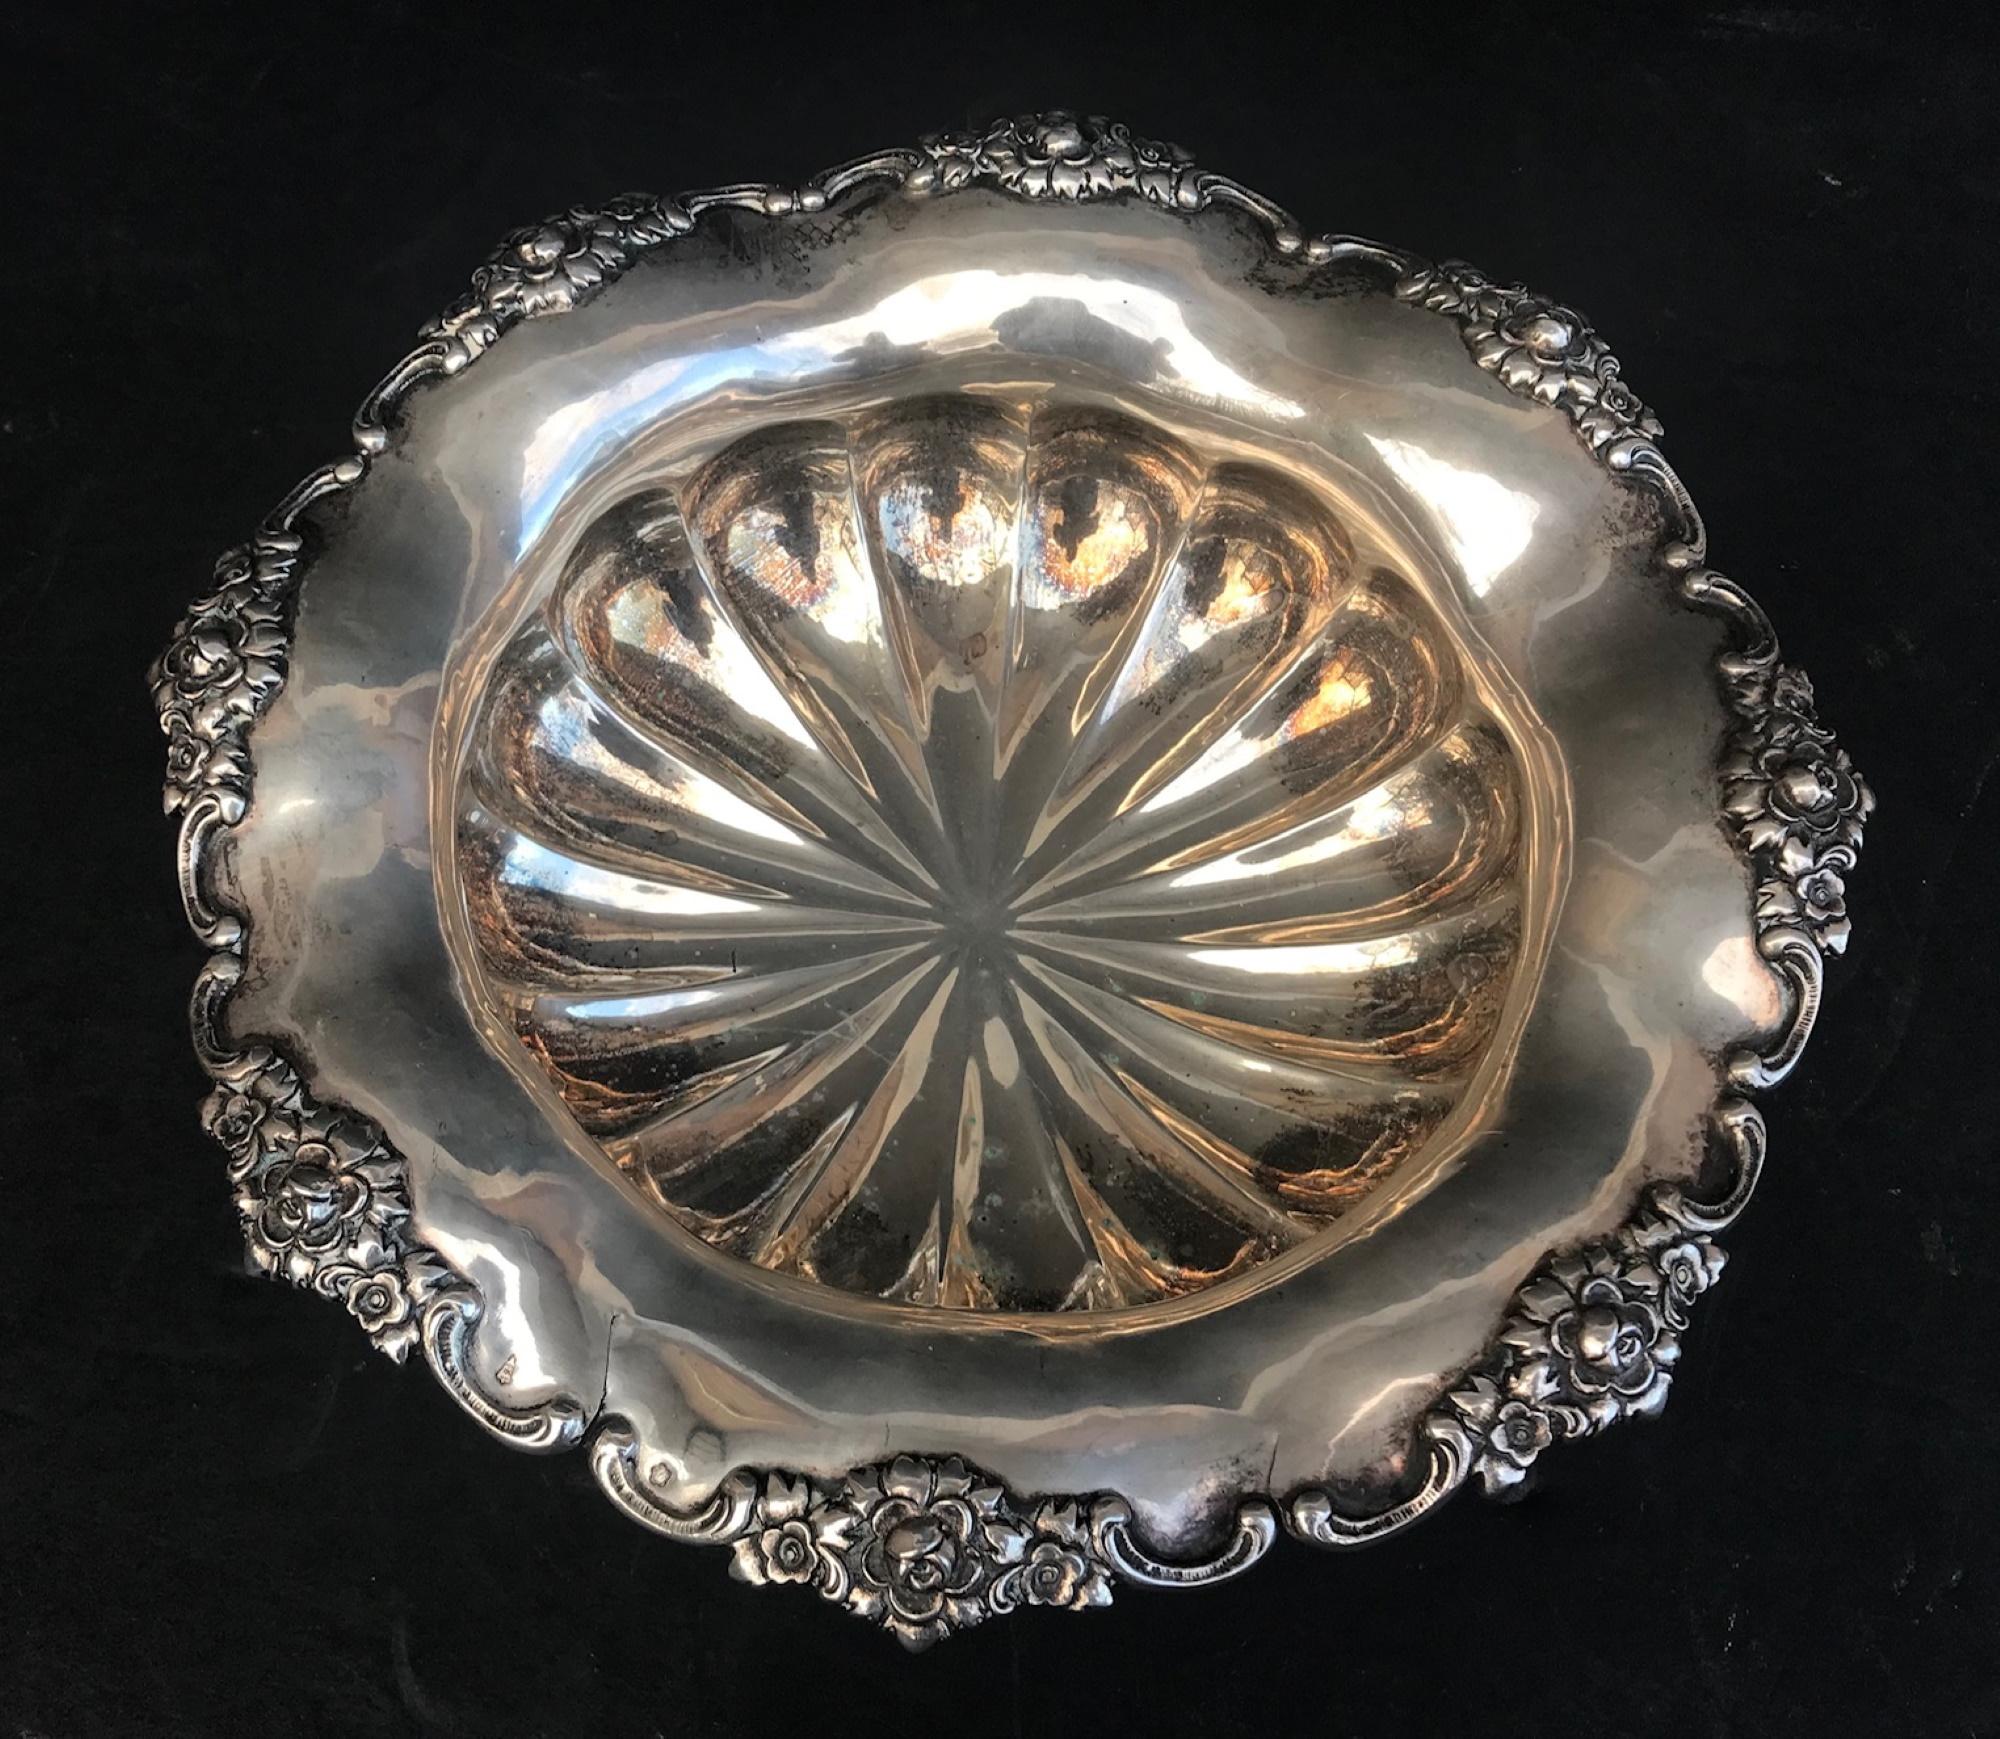 Viennese heavy silver Victorian footed bowl scalloped and embossed, circa 1870

A round, scalloped, flared rim dish boasts an ornately embossed floral design. The heavy body features a bulbous radiating panel design raised on four claw feet. The